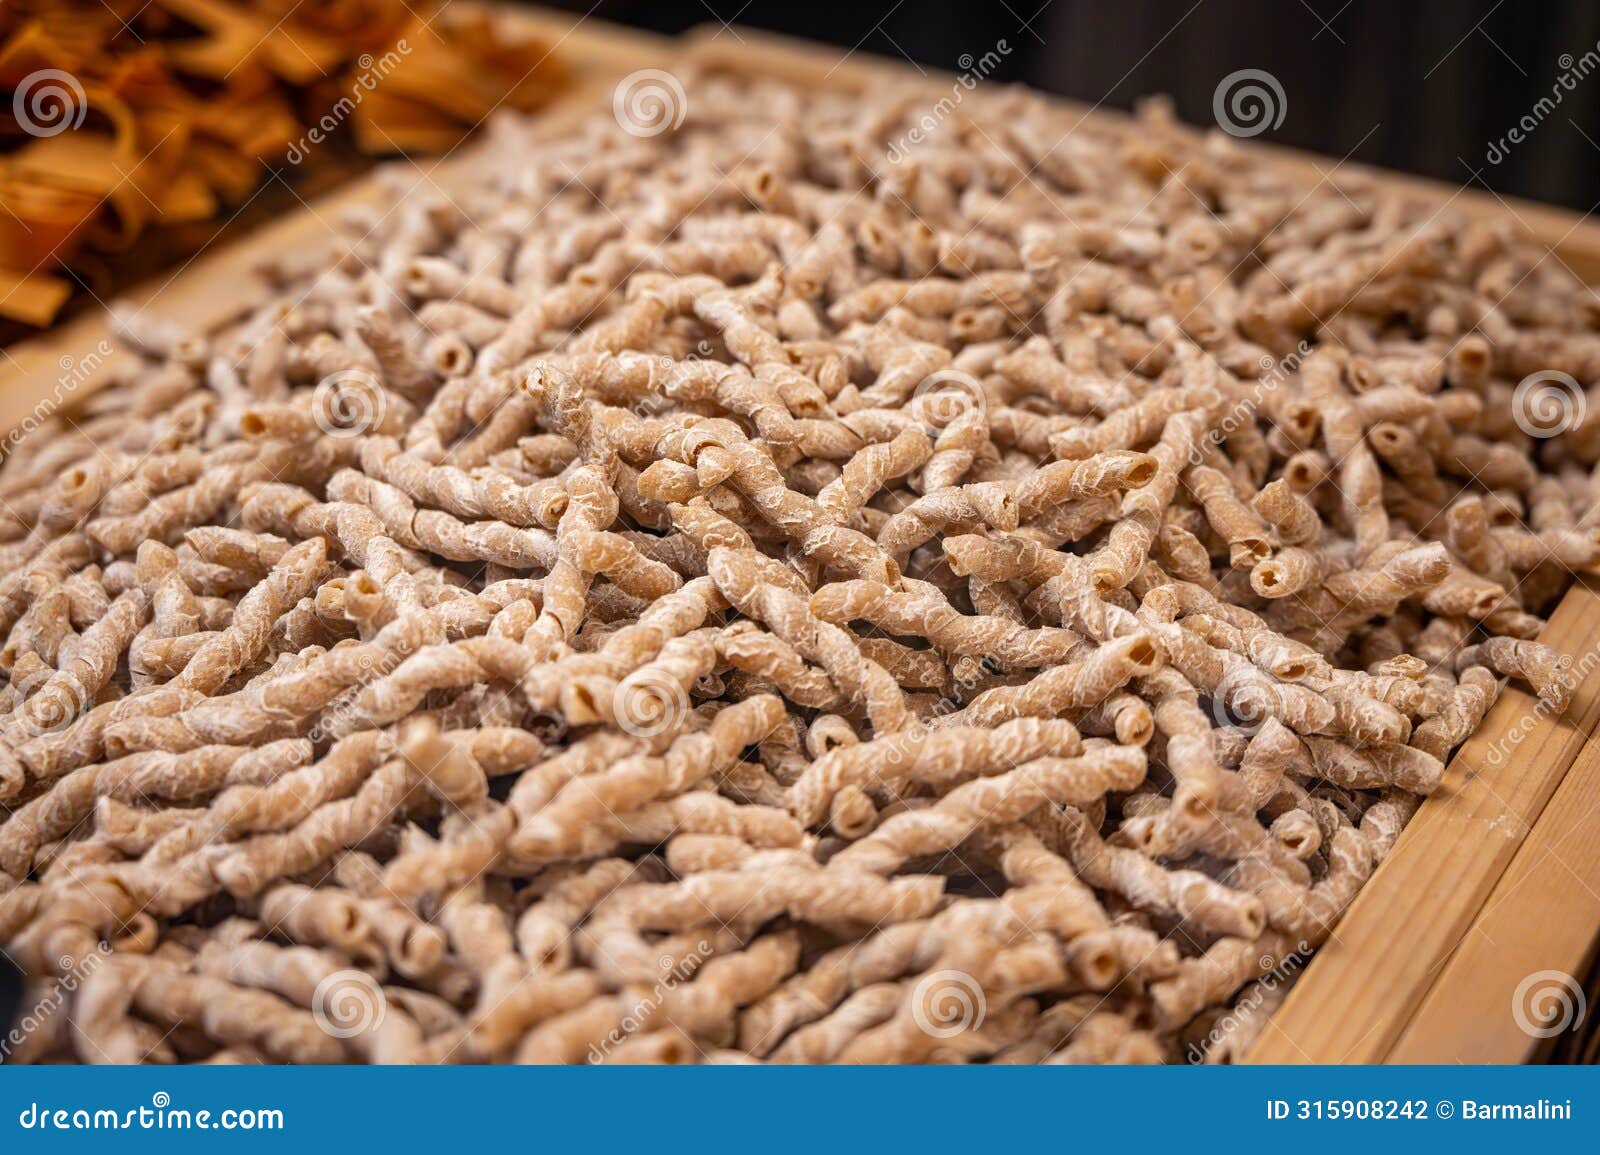 italian food, dried handmade colorful pasta with walnuts, ready to cook, milan, lombardy, italy